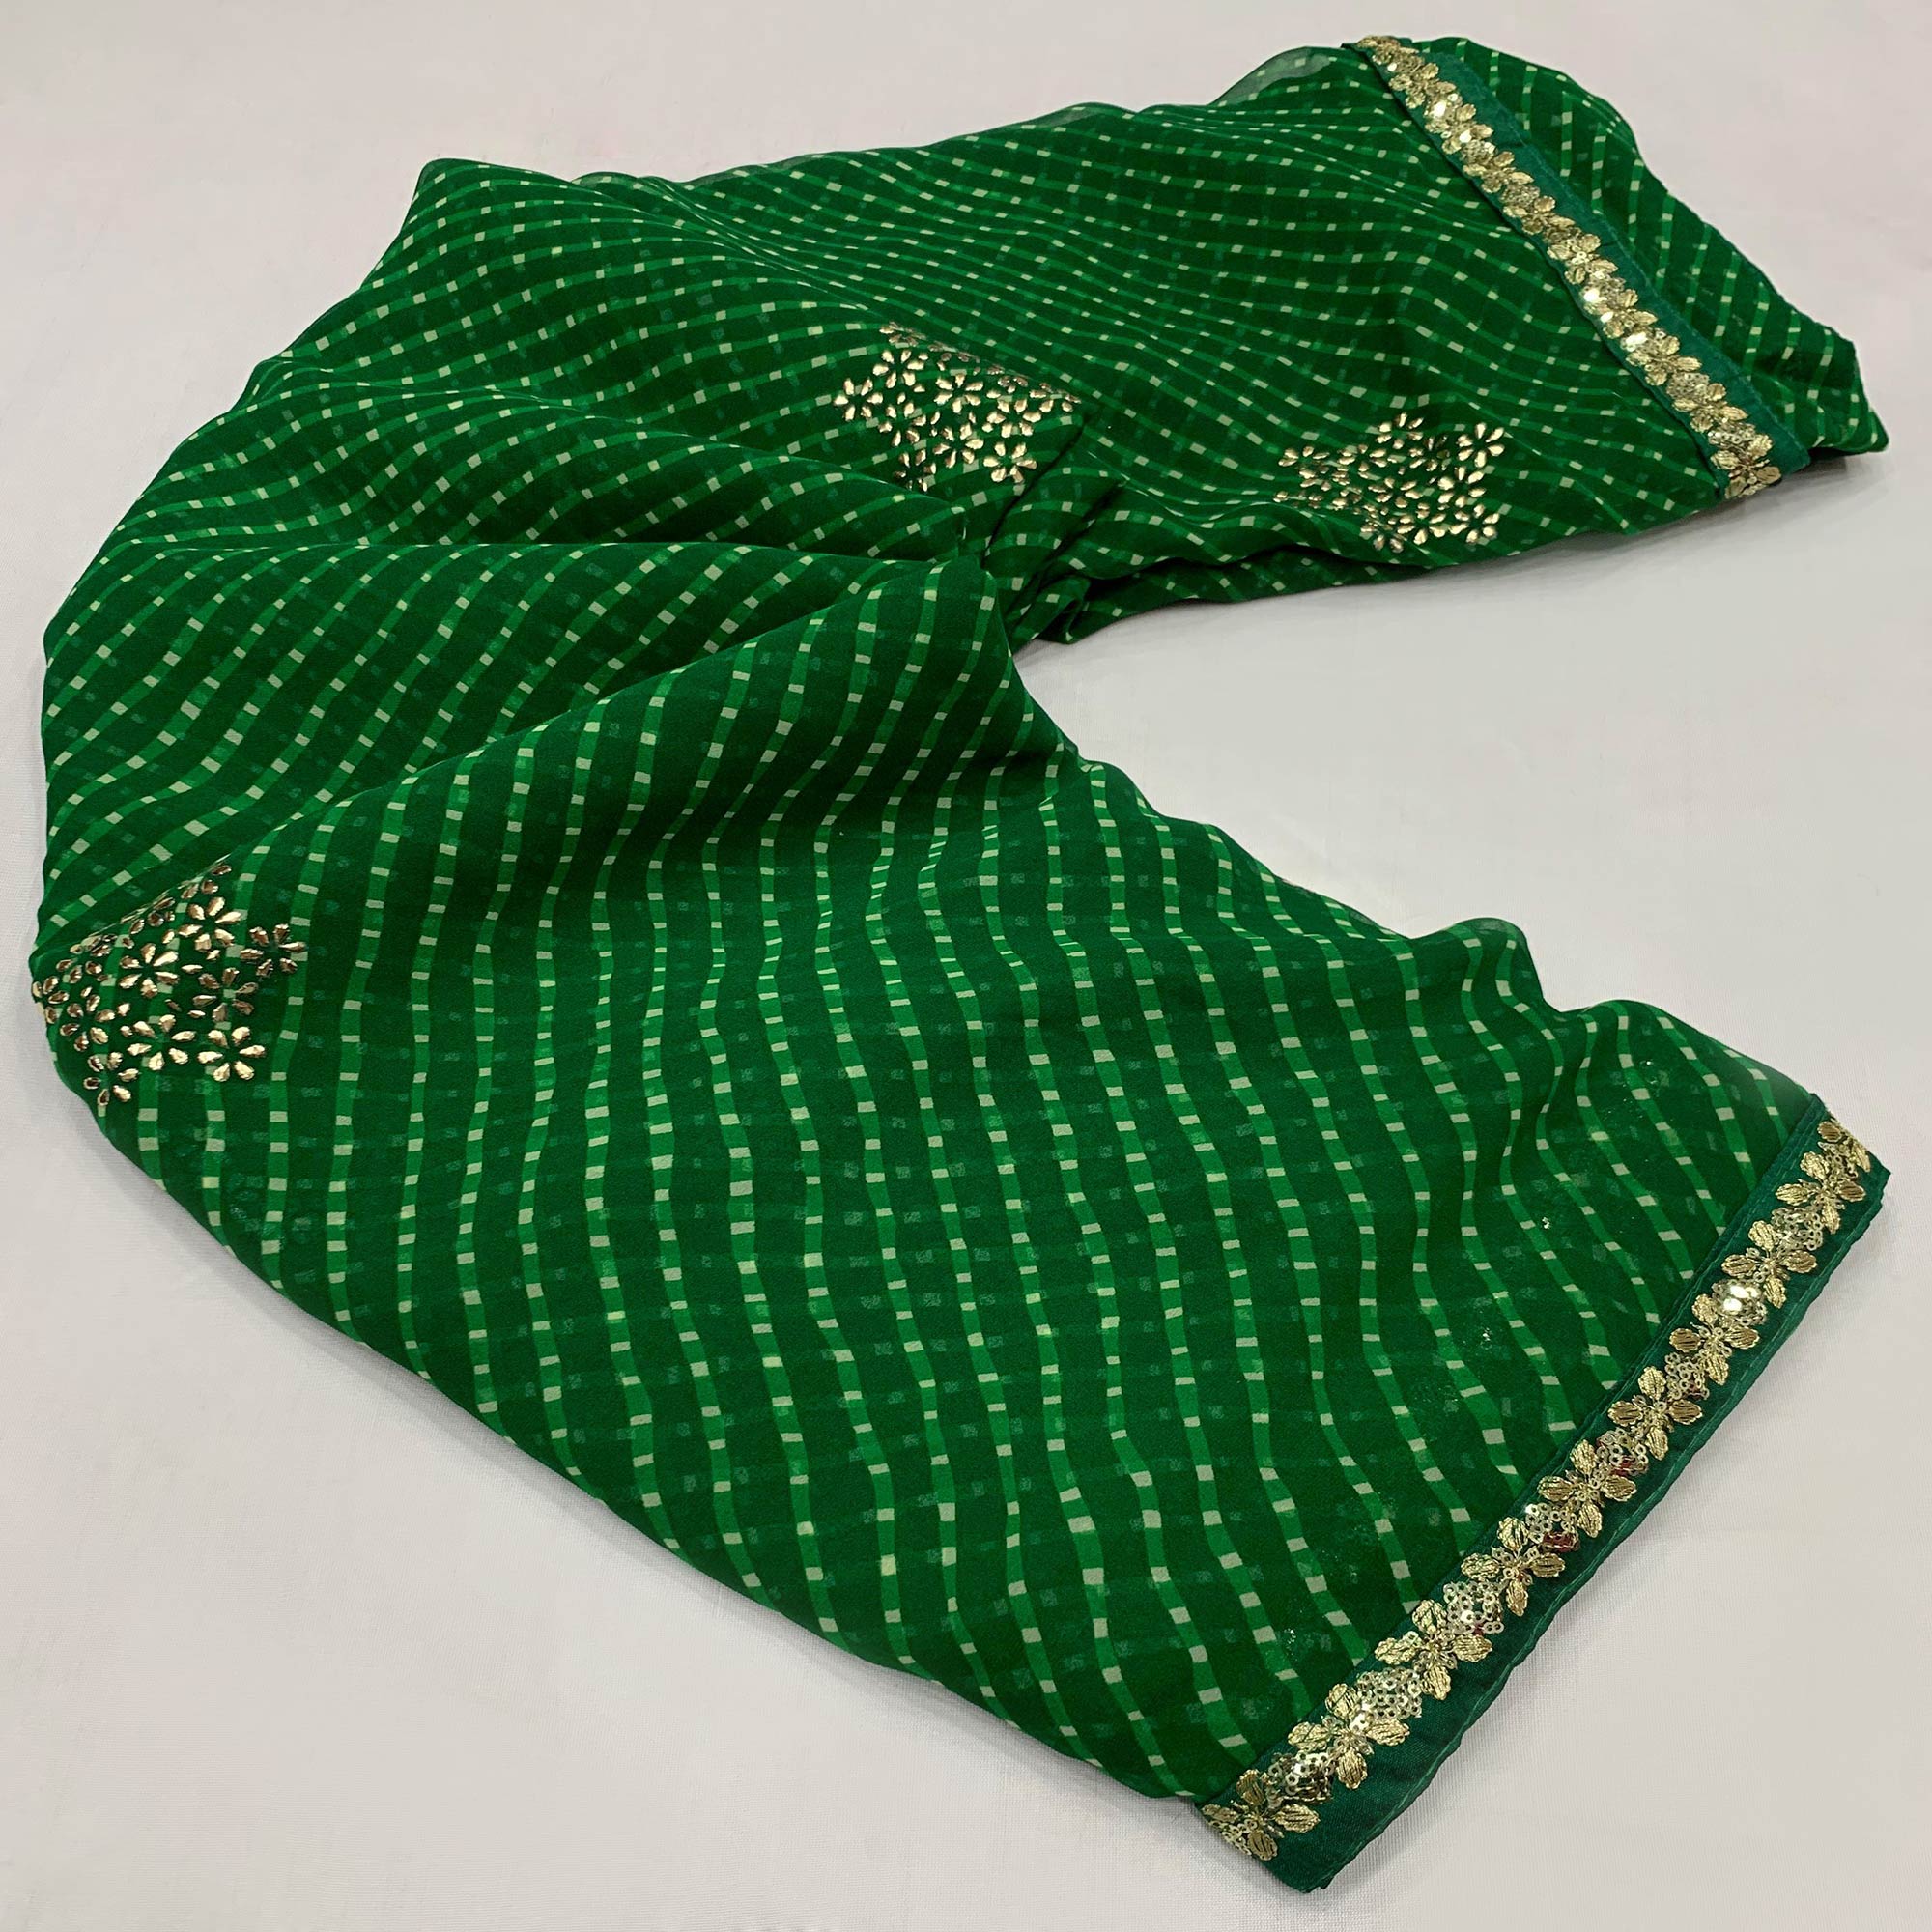 Dark Green Printed Georgette Saree With lace Border